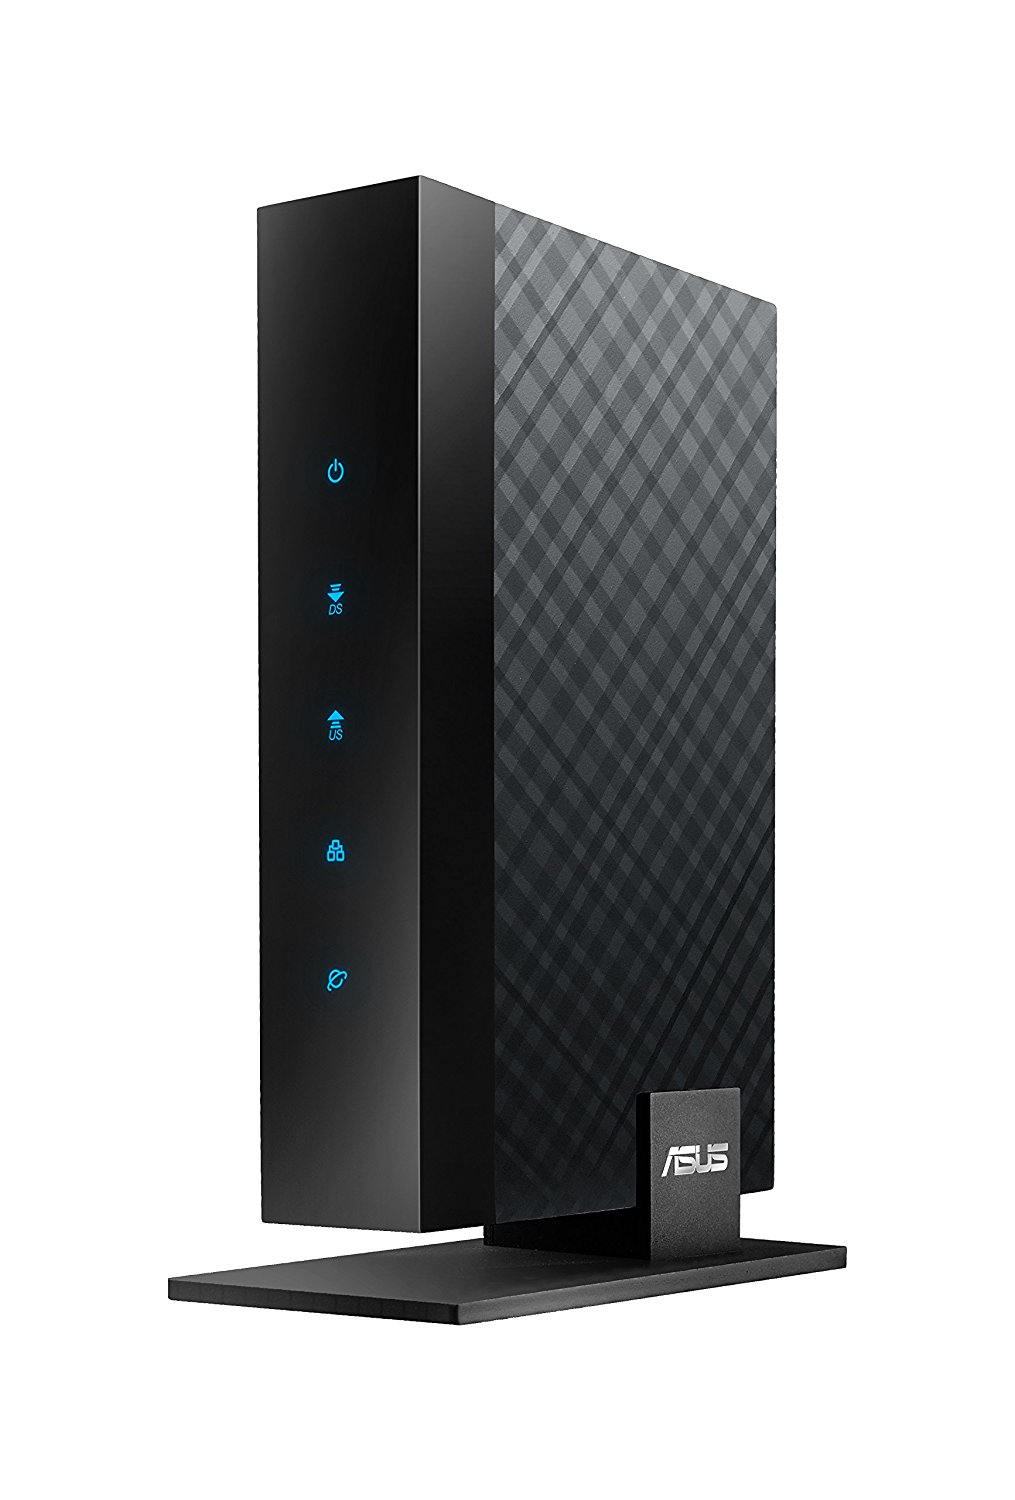 Prime Day deal: Asus DOCSIS 3.0 high-speed cable modem for $50